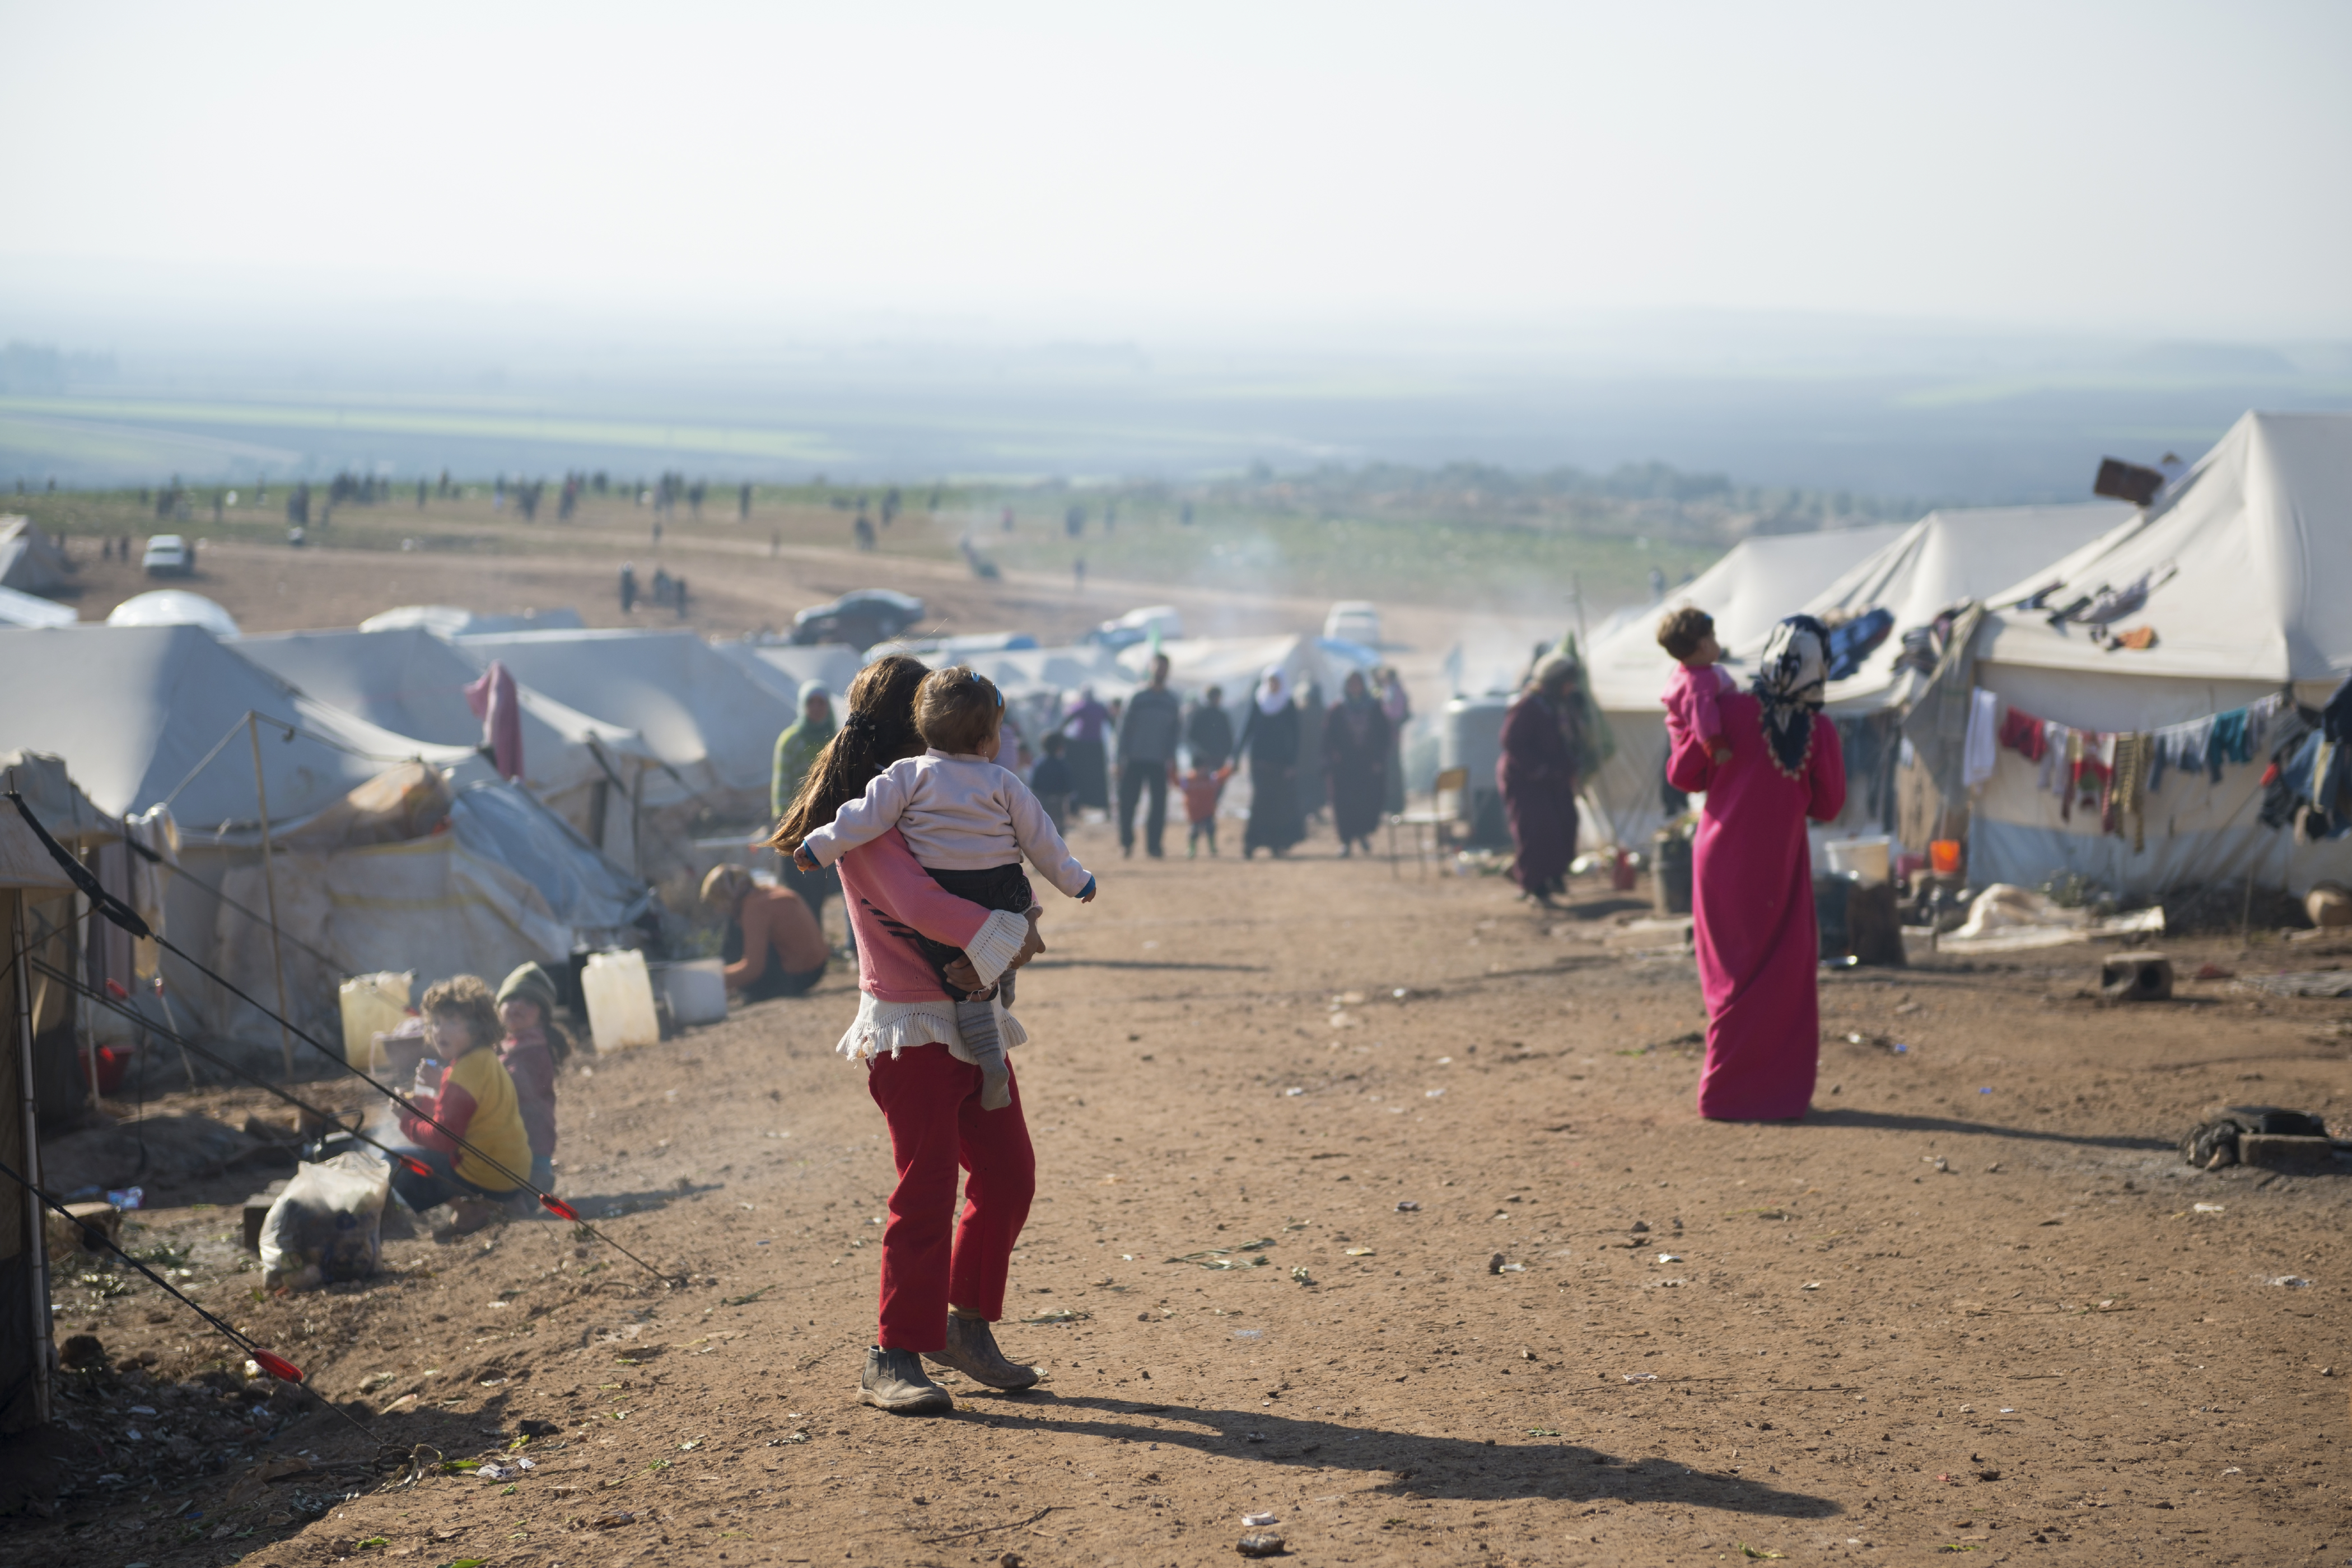 Syrian refugees walk outside their tents at a camp for internally displaced persons in Atmeh, Syria, adjacent to the Turkish border. (iStock Photo)